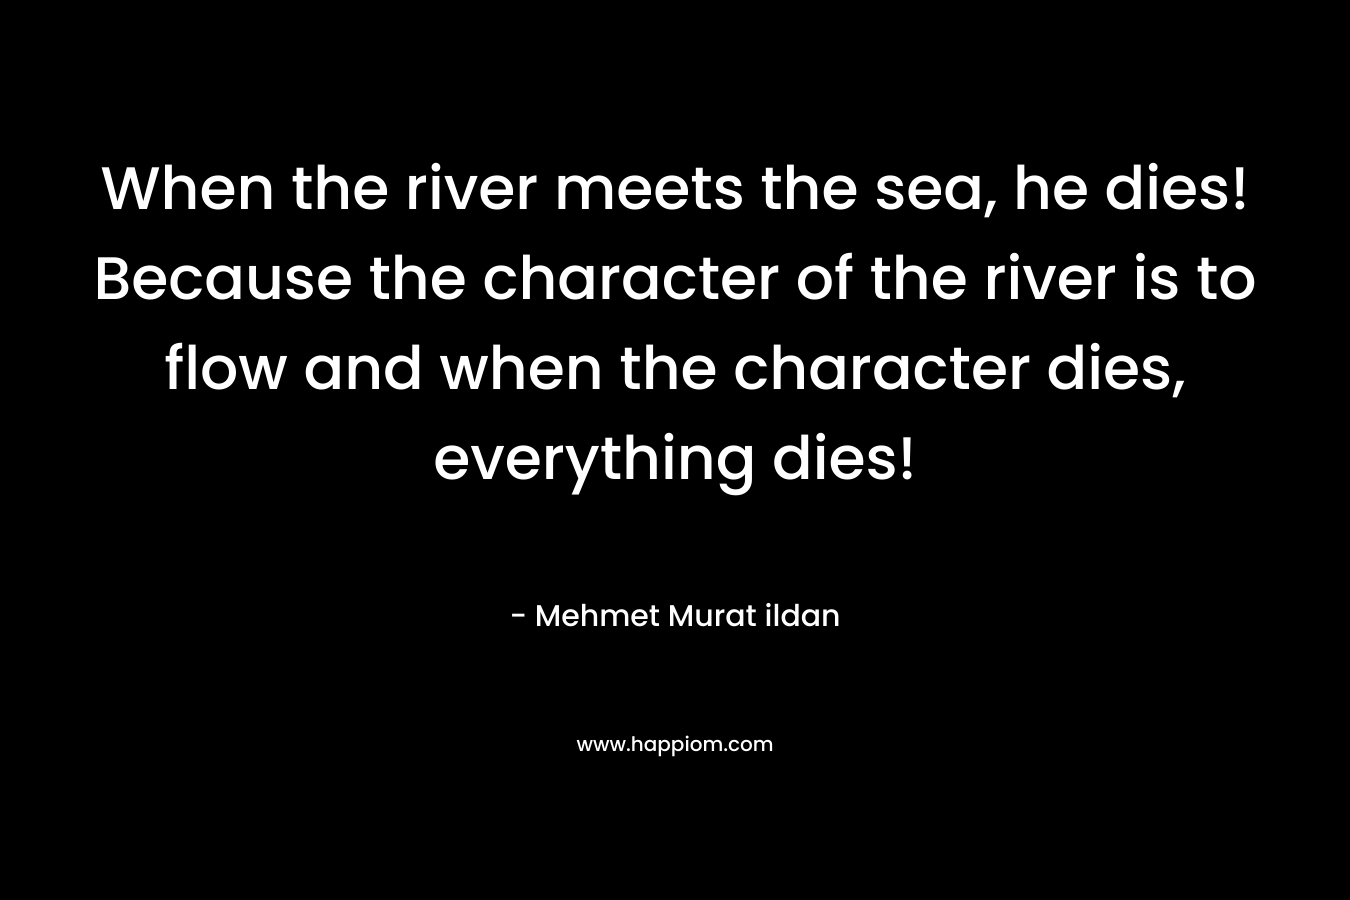 When the river meets the sea, he dies! Because the character of the river is to flow and when the character dies, everything dies!